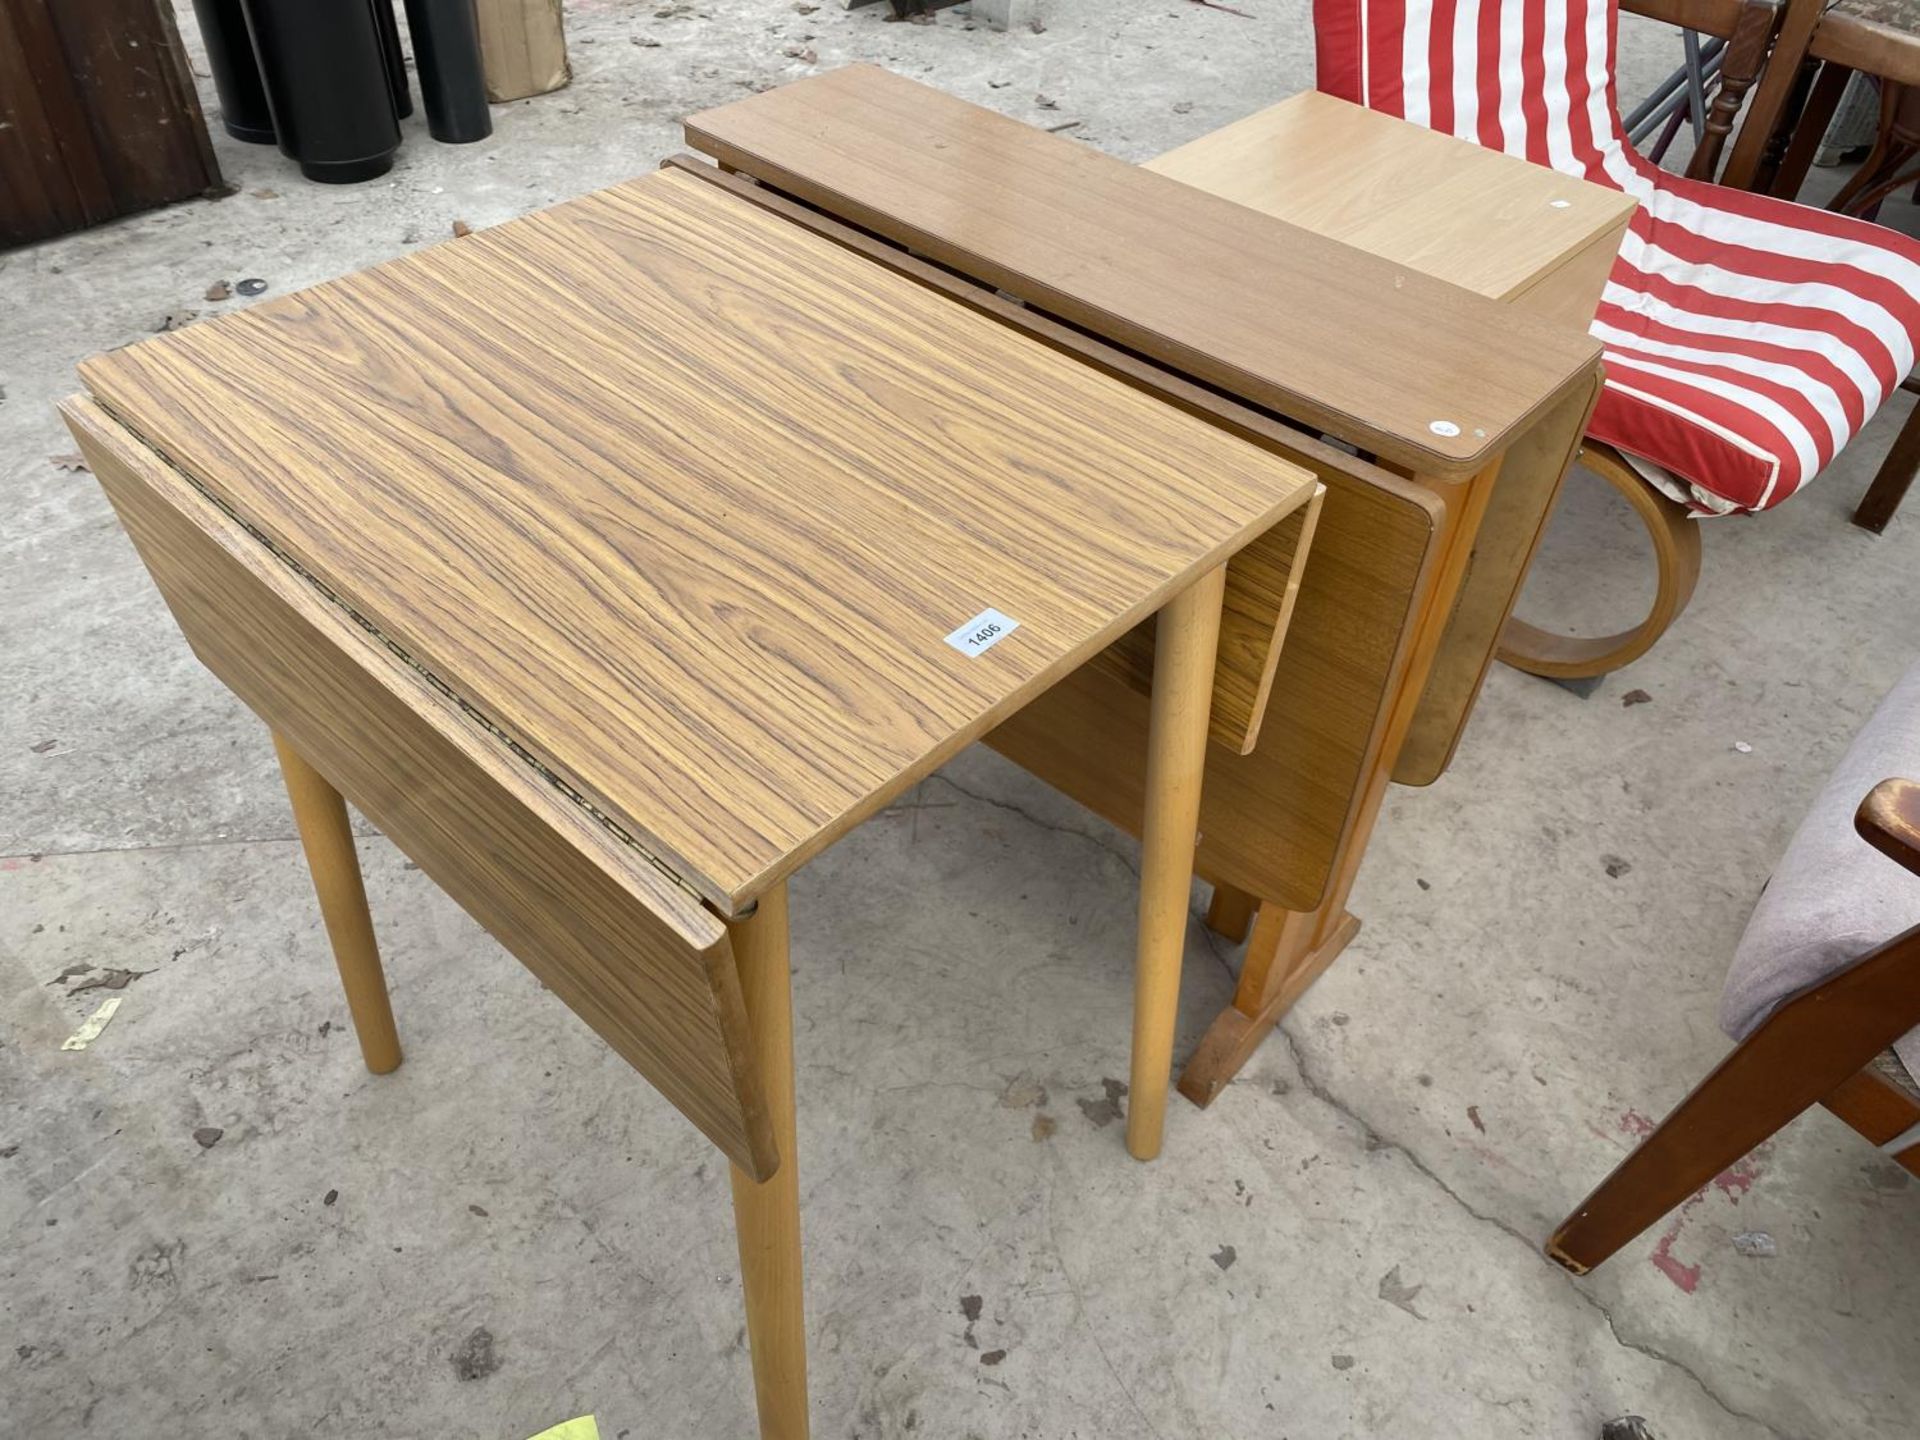 SIX ITEMS - TWO RETRO FORMICA DROP LEAF KITCHEN TABLES, A BEECH EFFECT BEDSIDE CHEST, A BEECH